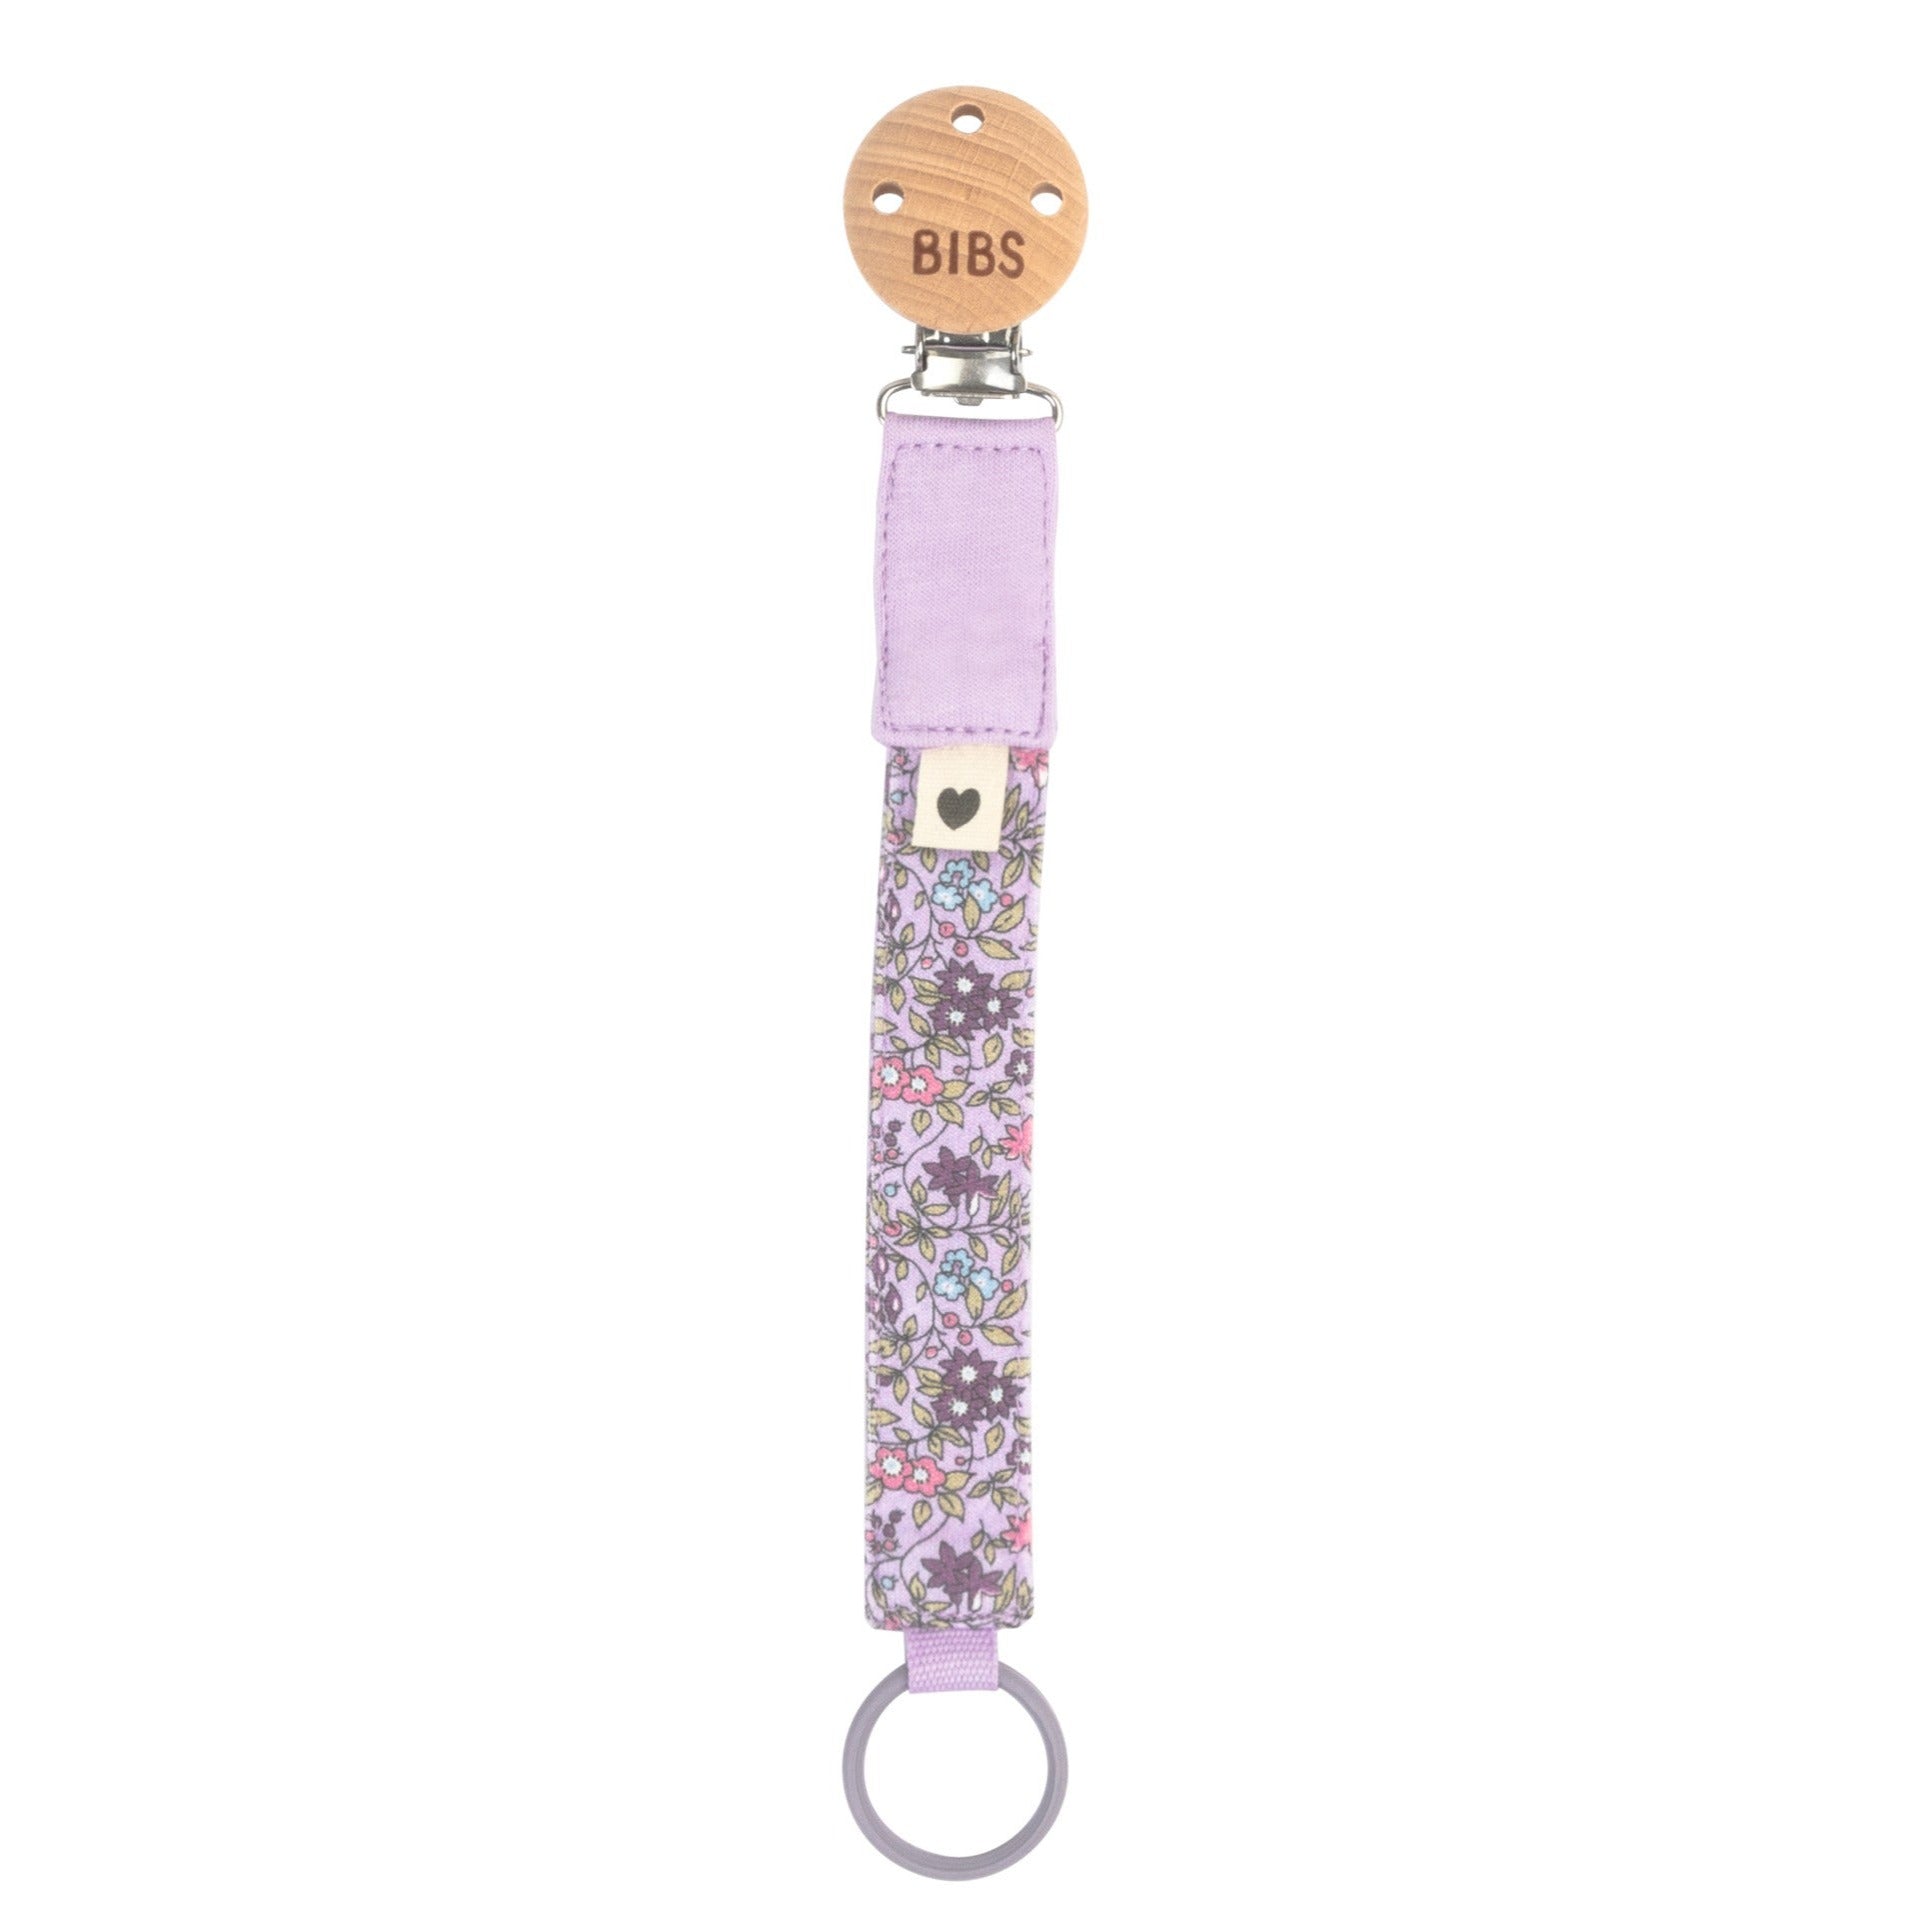 BIBS LIBERTY Pacifier Clip - Chamomile Lawn Violet Sky